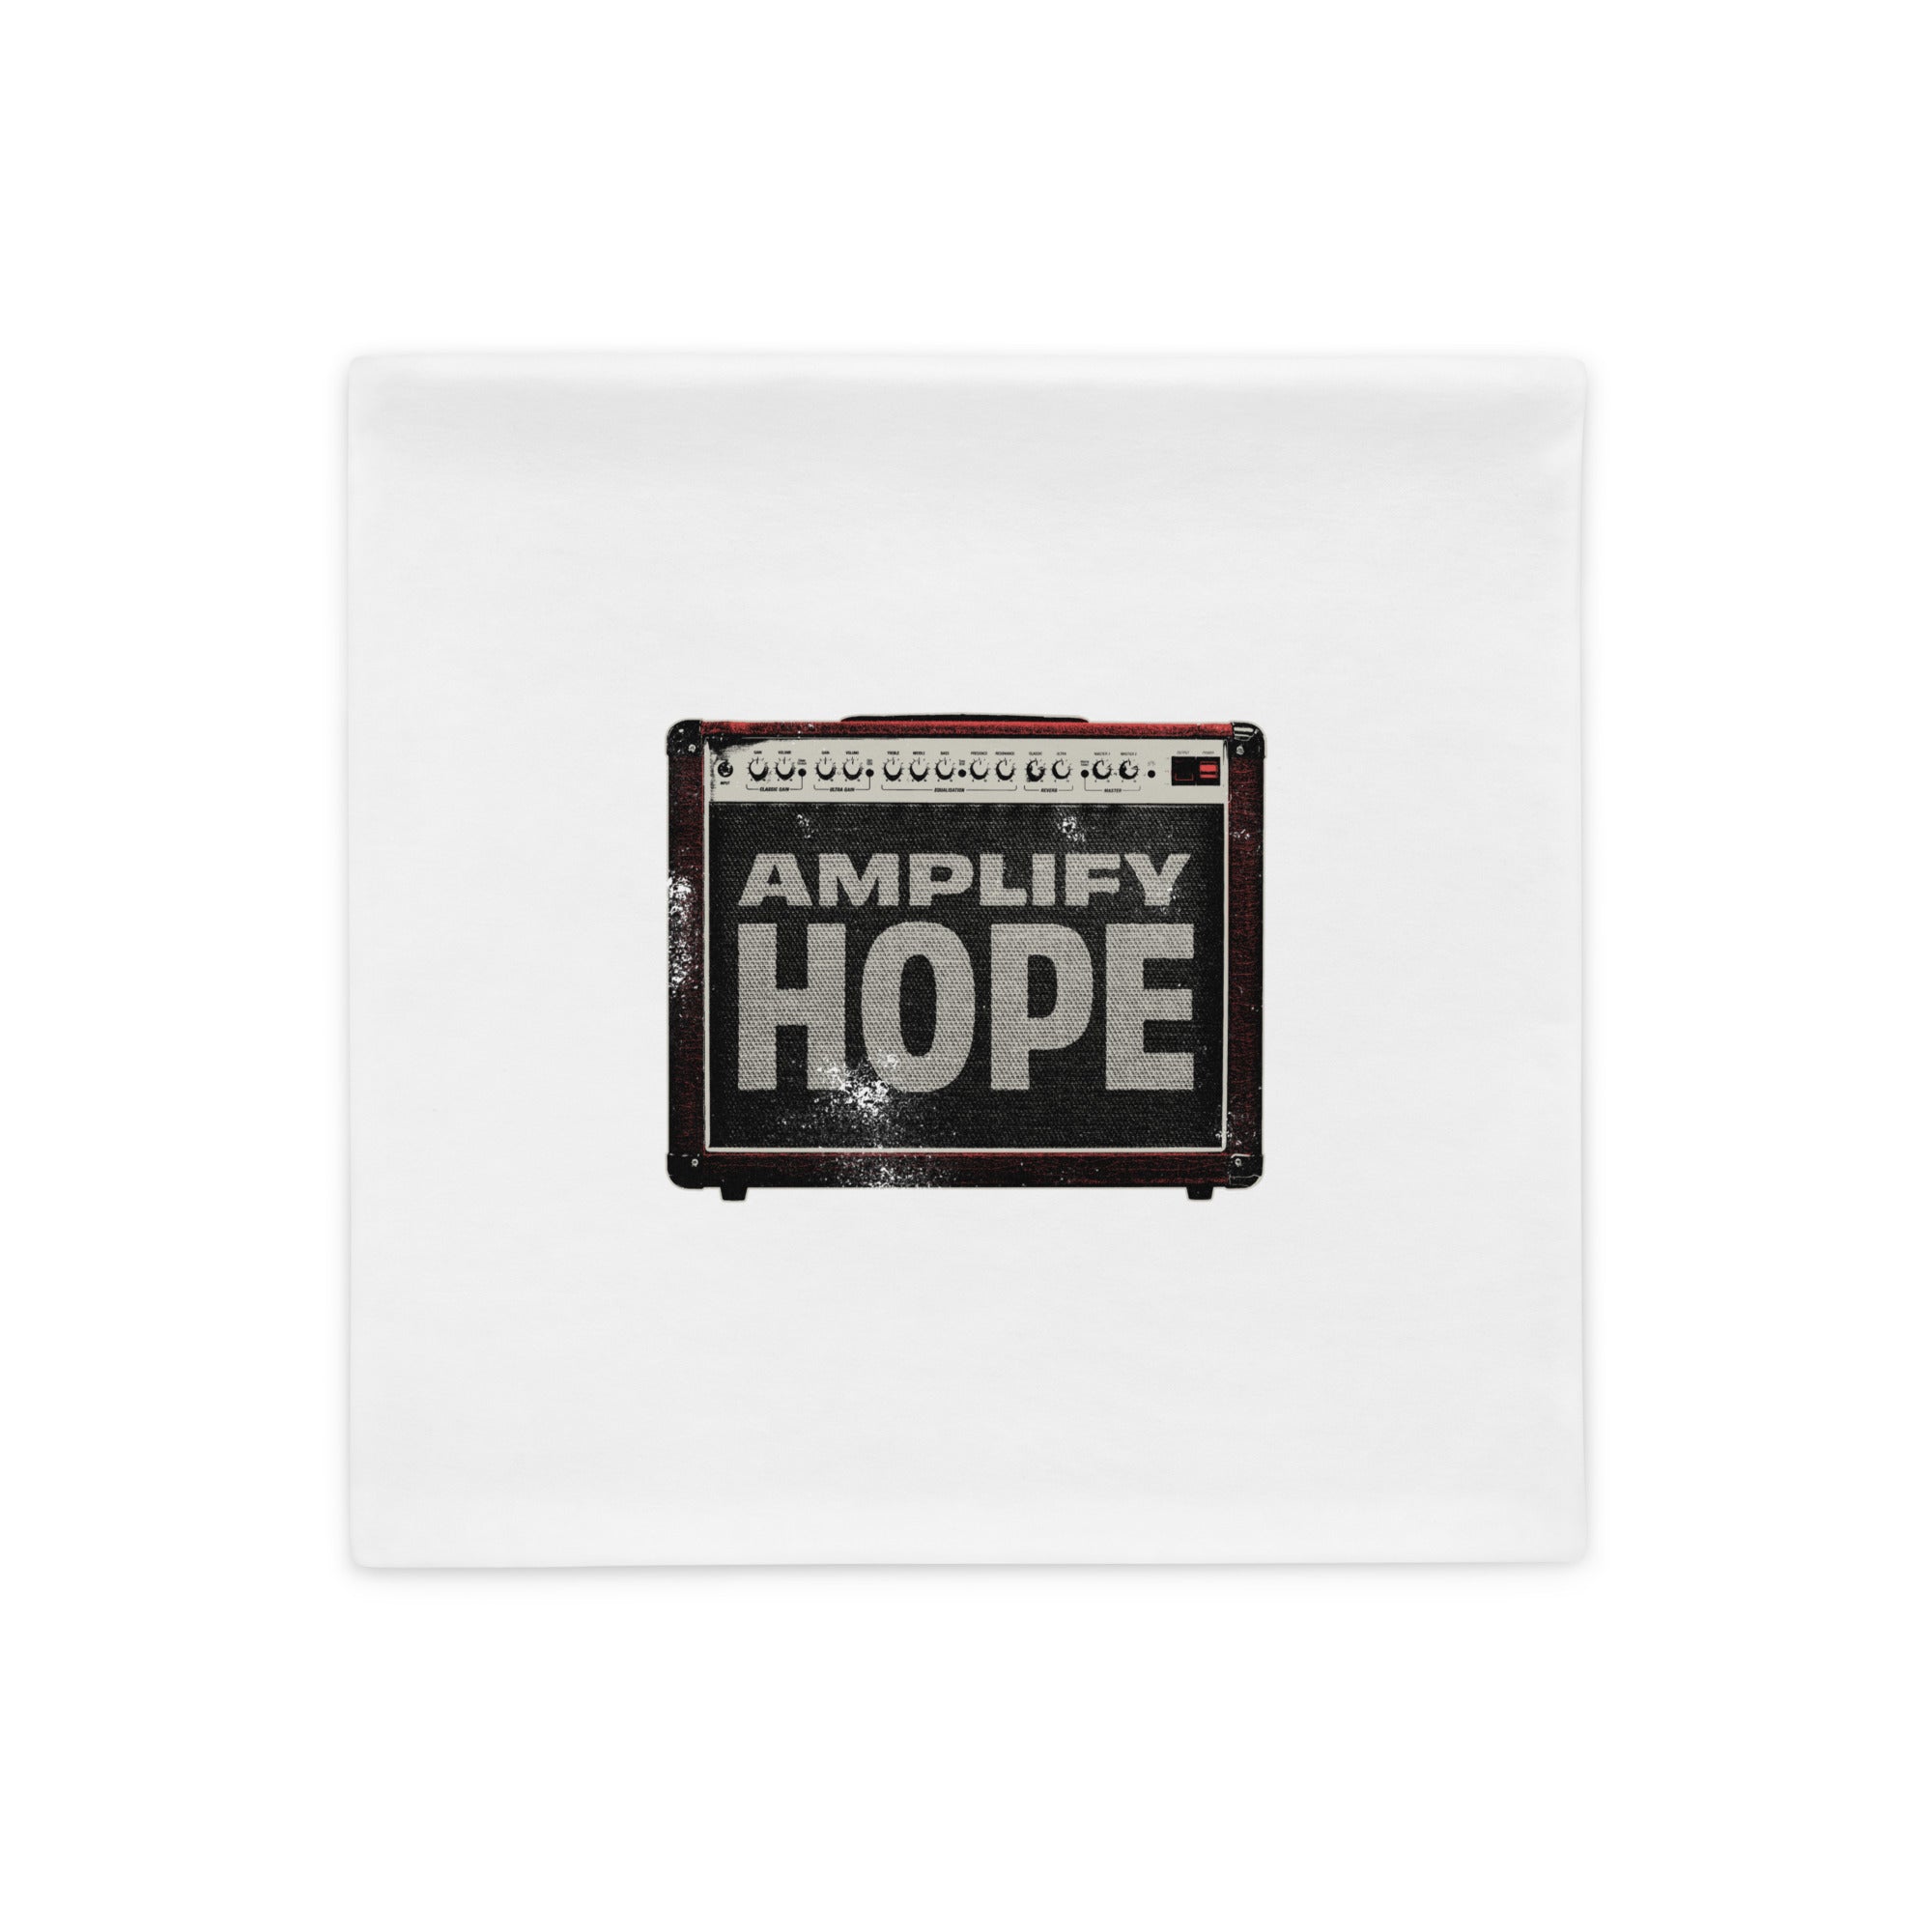 Amplify Hope - Pillow Case